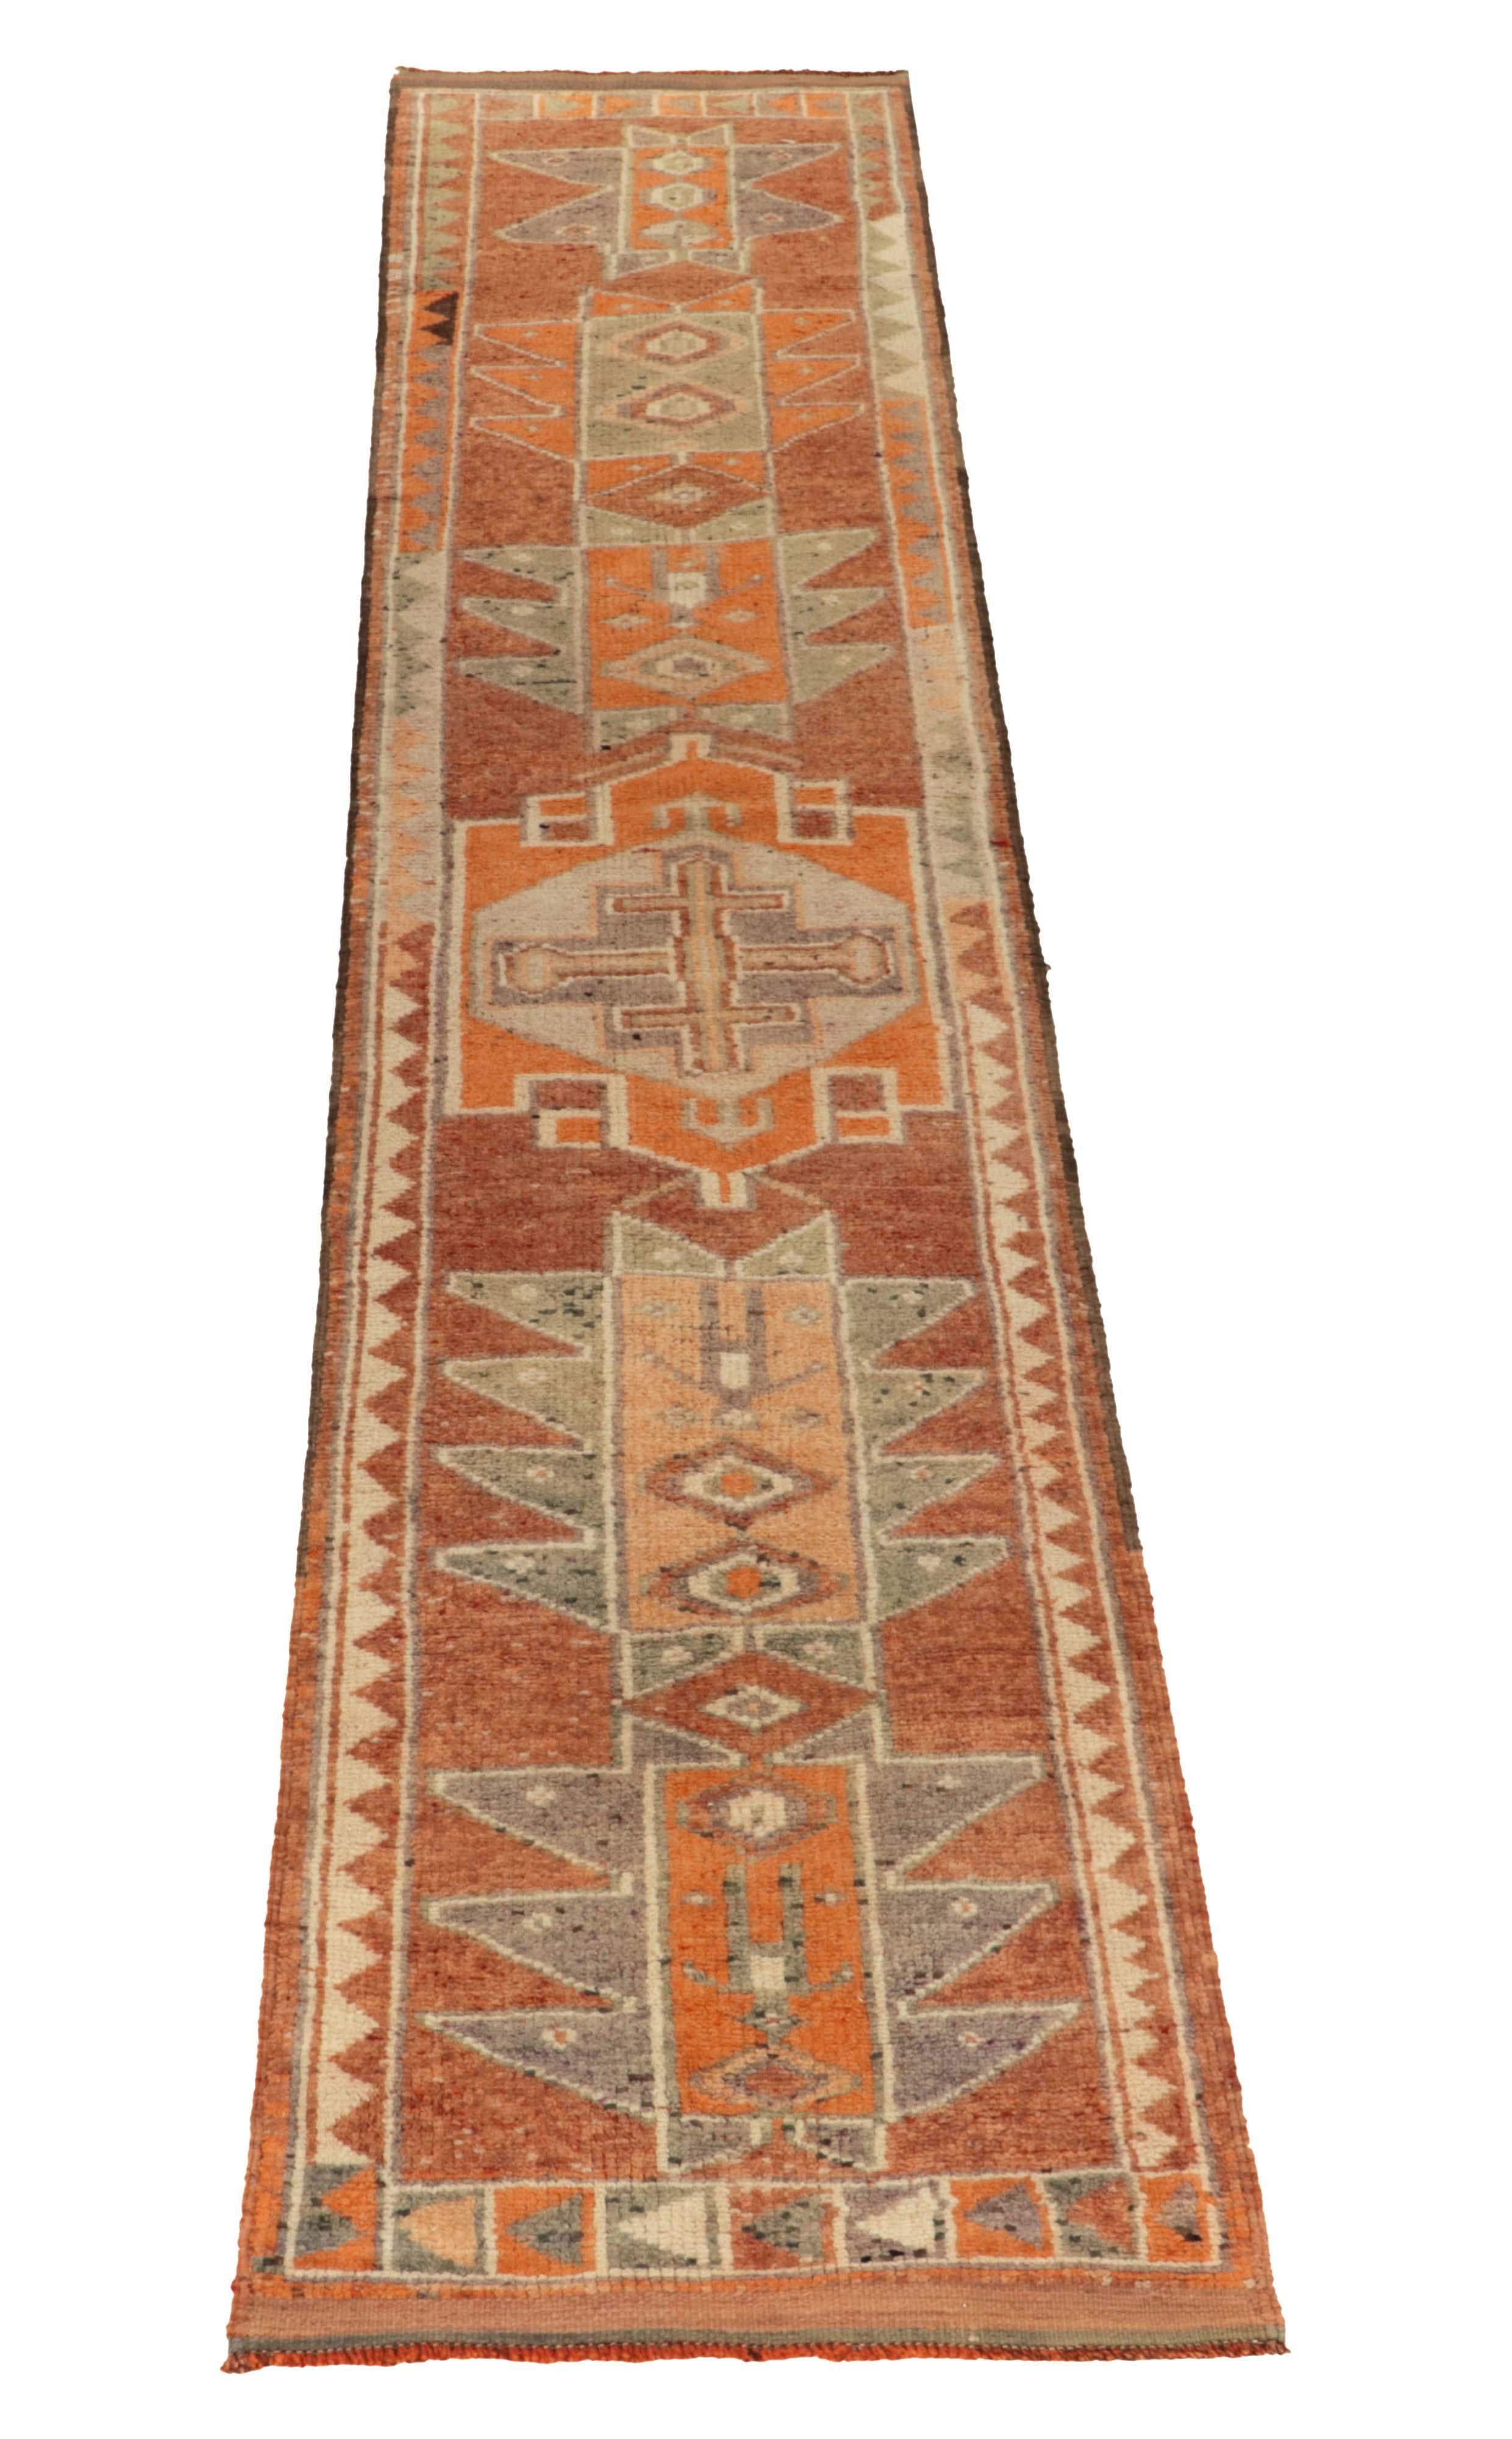 Hand-knotted in a fabulously texture wool, a 3x14 runner from Rug & Kilim’s prominent curation of rare tribal pieces. 

Originating from Turkey circa 1950-1960, the sketch enjoys traditional motifs on the field in warm orange, beige-brown, green &